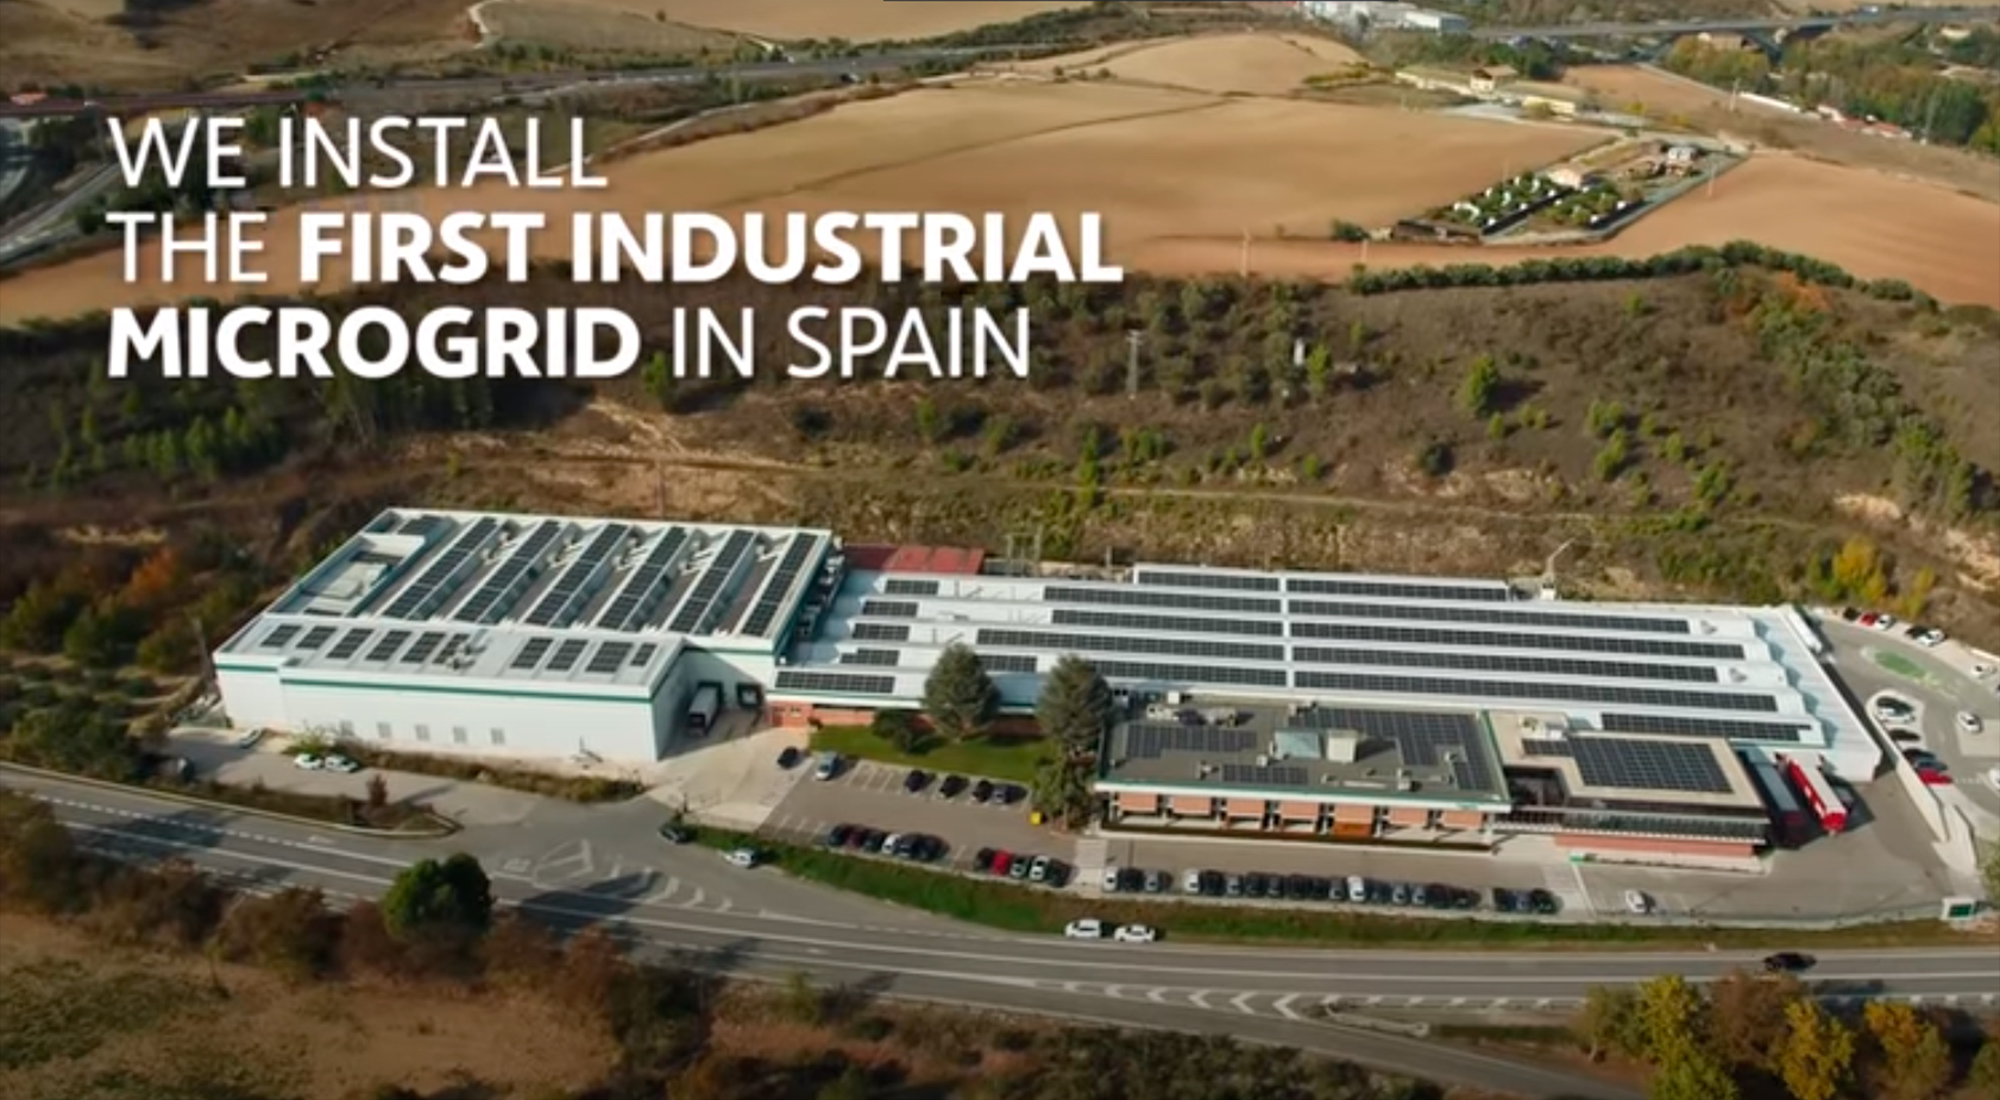 WE INSTALL THE FIRST INDUSTRIAL MICROGRID IN SPAIN